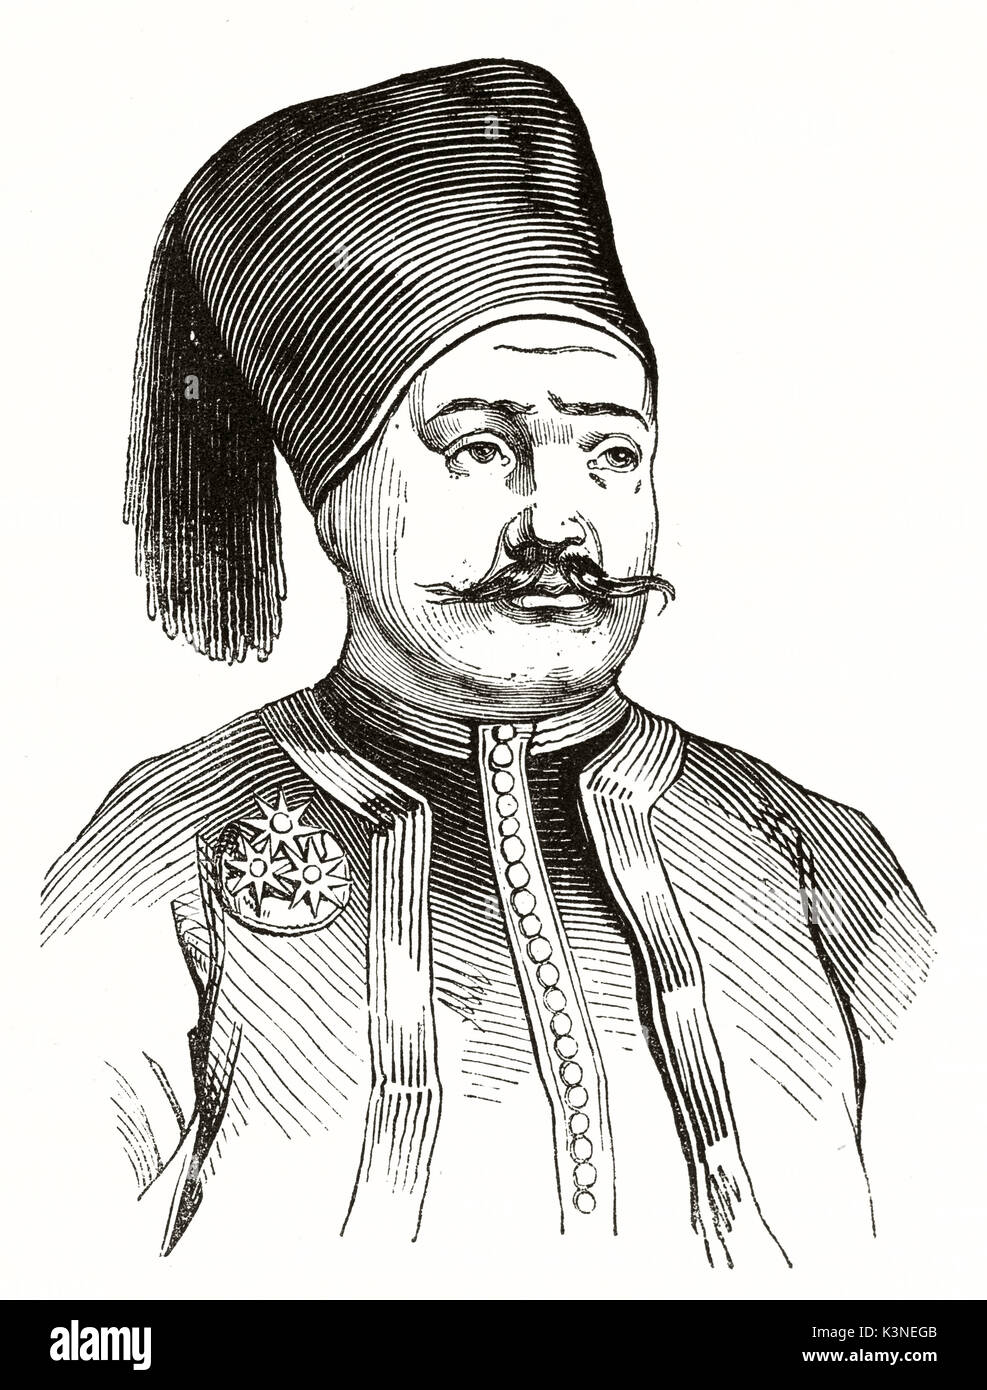 Ancient bust portrait  portrait of Soliman Pasha (1788 -1860) French-born Egyptian commander. Illustration executed with a elegant hatching. Published on Magasin Pittoresque Paris 1839 Stock Photo